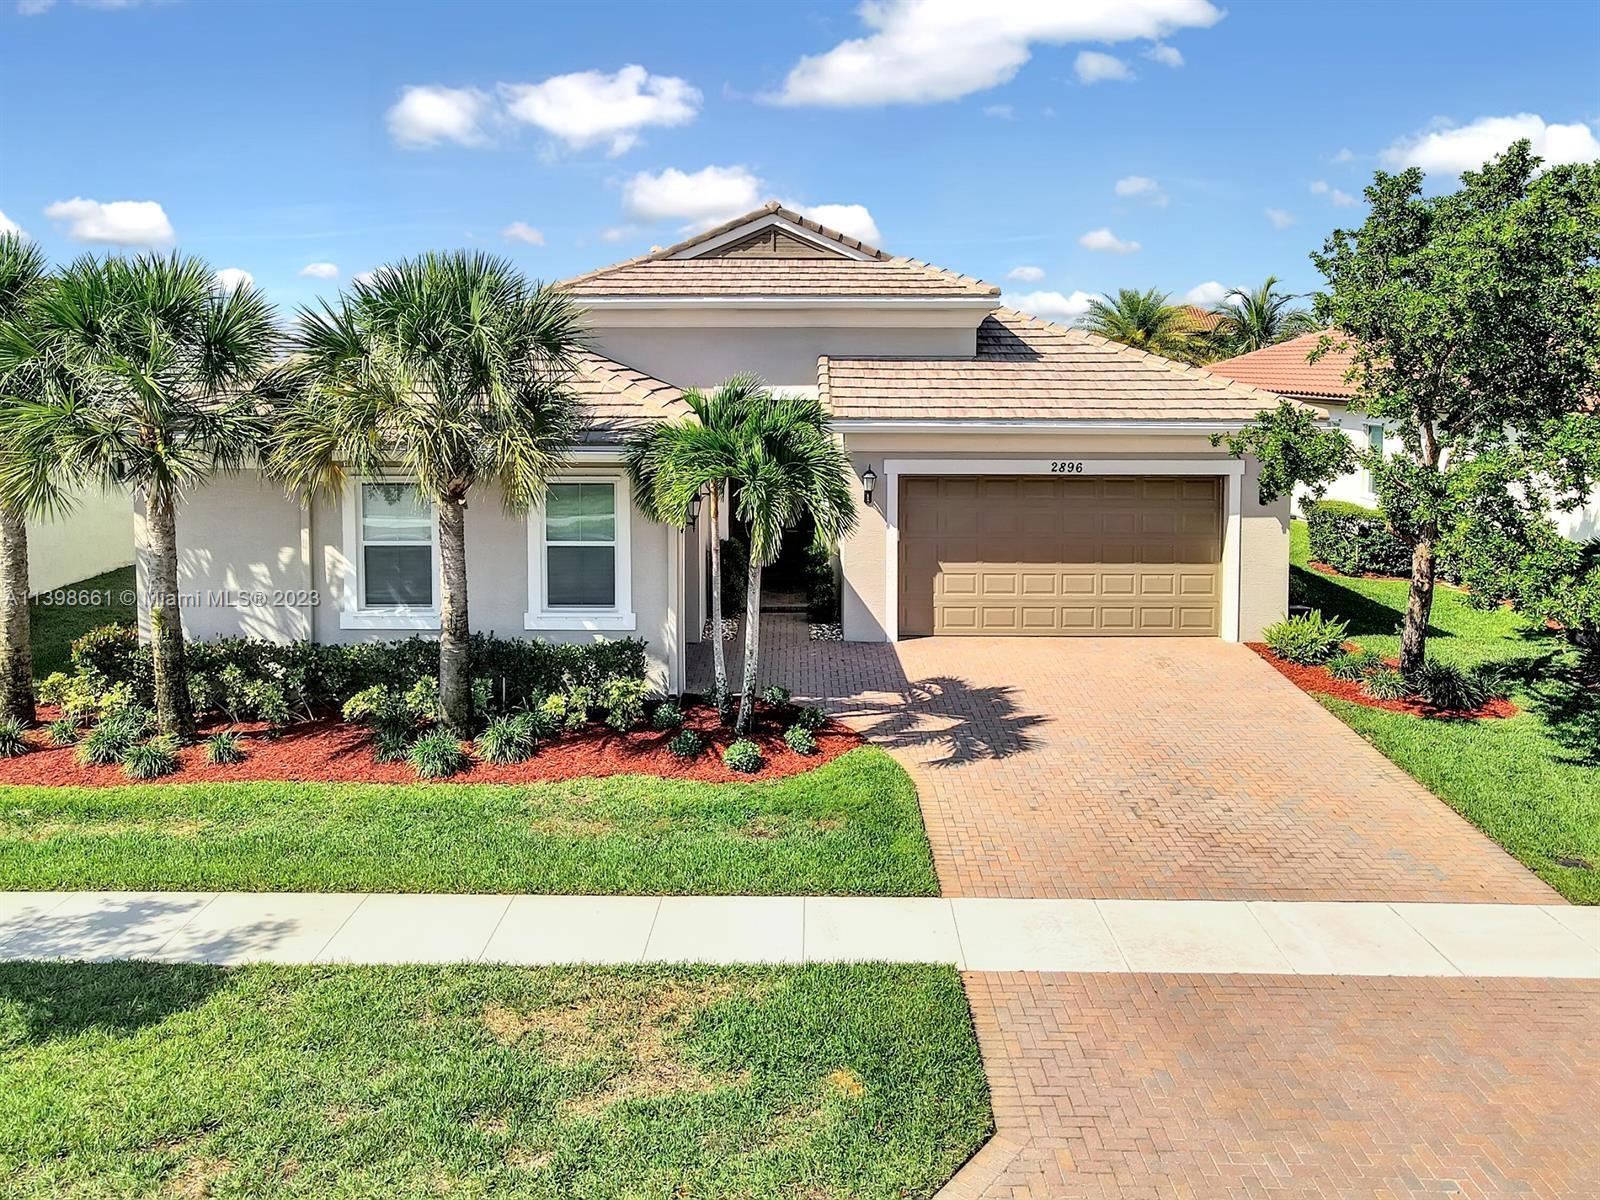 WATERFRONT HOME*WELCOME TO PORTOSOL IN PALM BEACH COUNTY*2,826 FINISHED SQFT*FULLY FURNISHED HOME FE